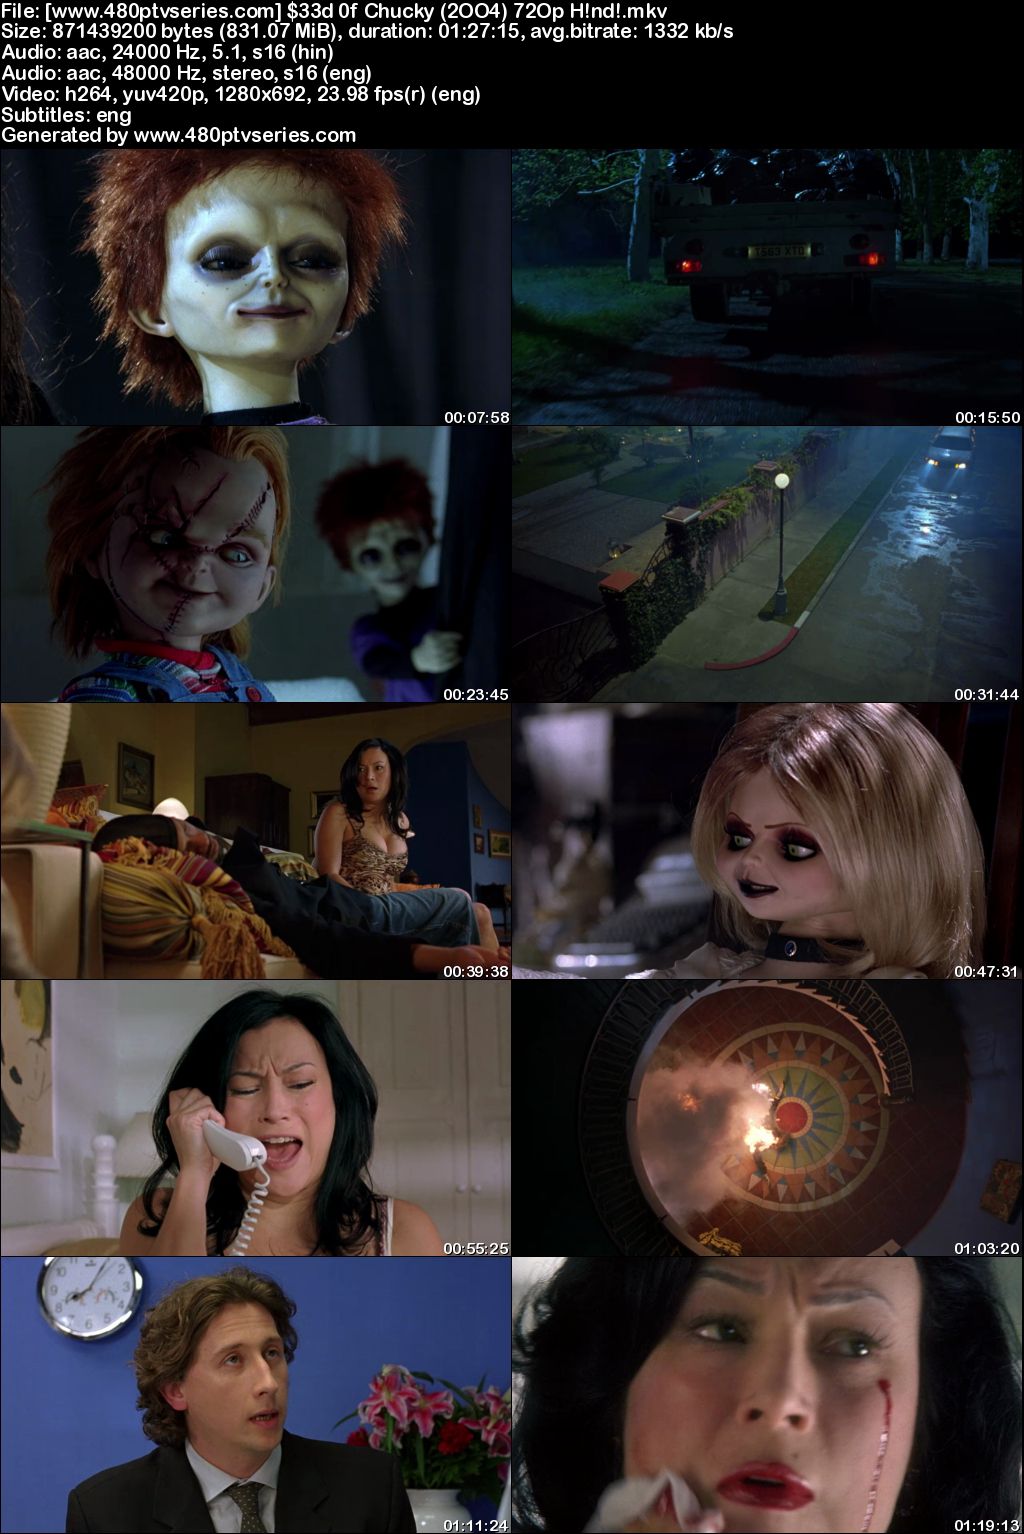 Watch Online Free Seed of Chucky (2004) Full Hindi Dual Audio Movie Download 480p 720p Bluray